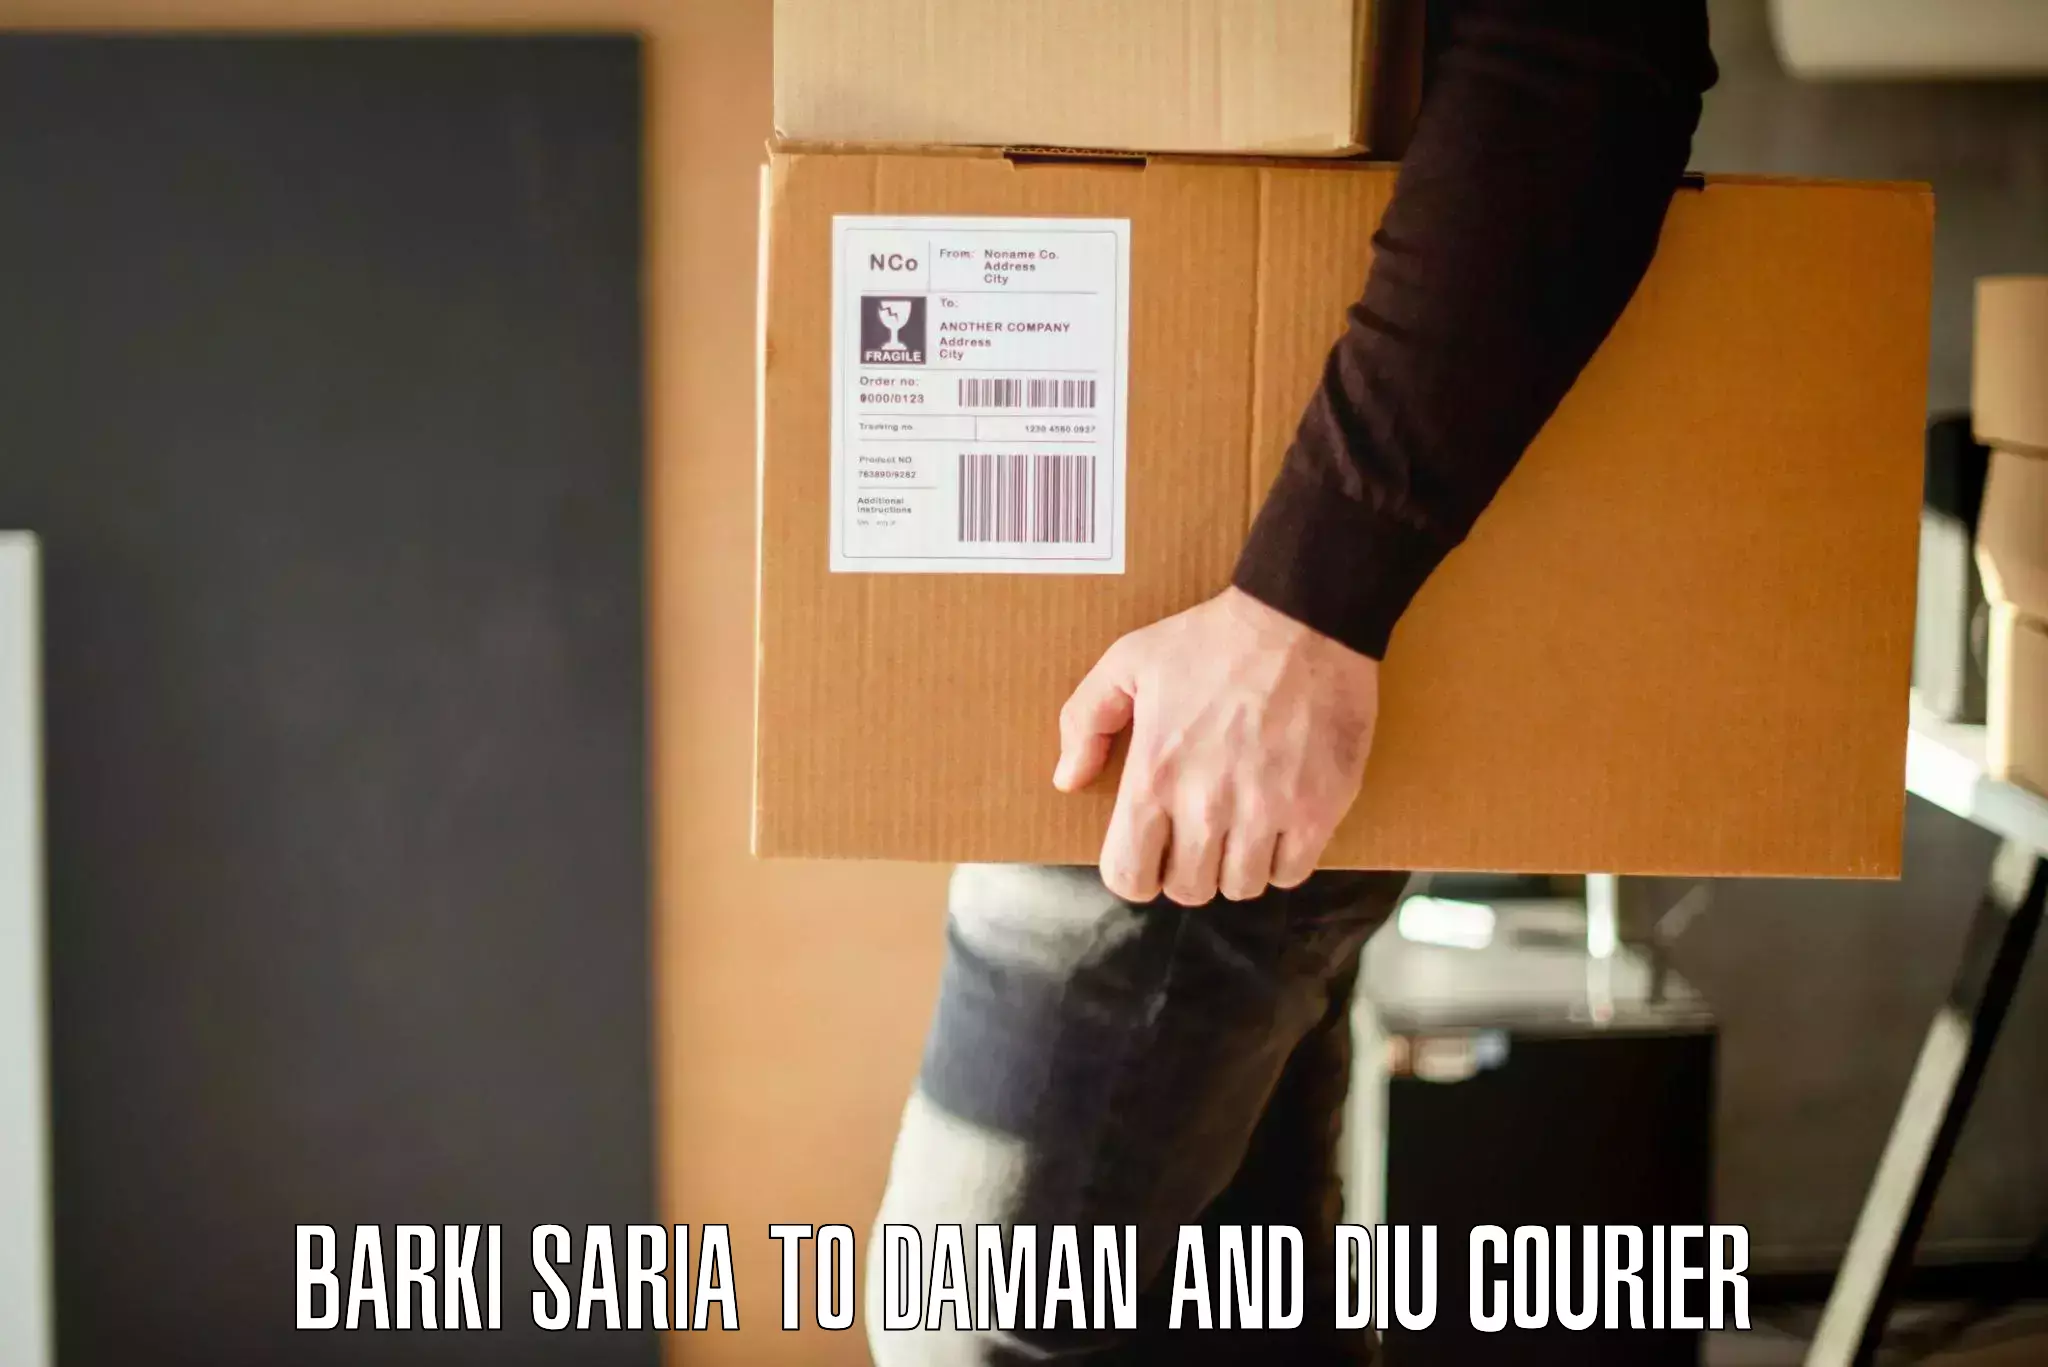 Home moving specialists in Barki Saria to Diu